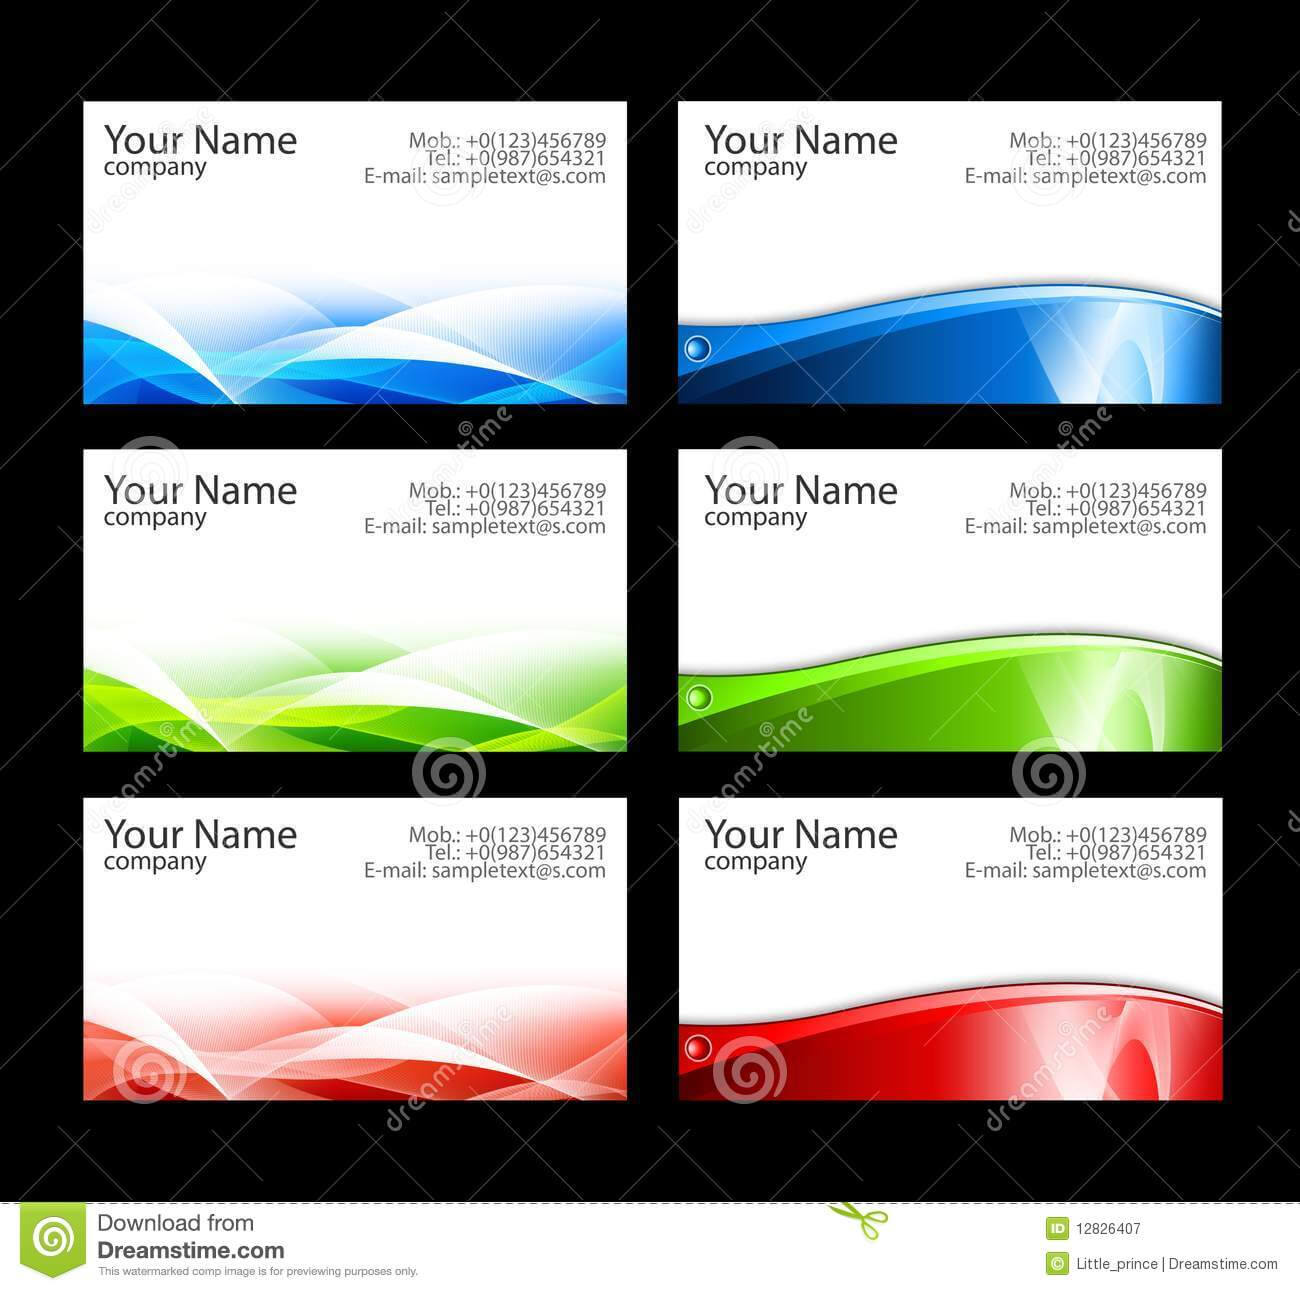 Business Cards Templates Stock Illustration. Illustration Of For Microsoft Templates For Business Cards